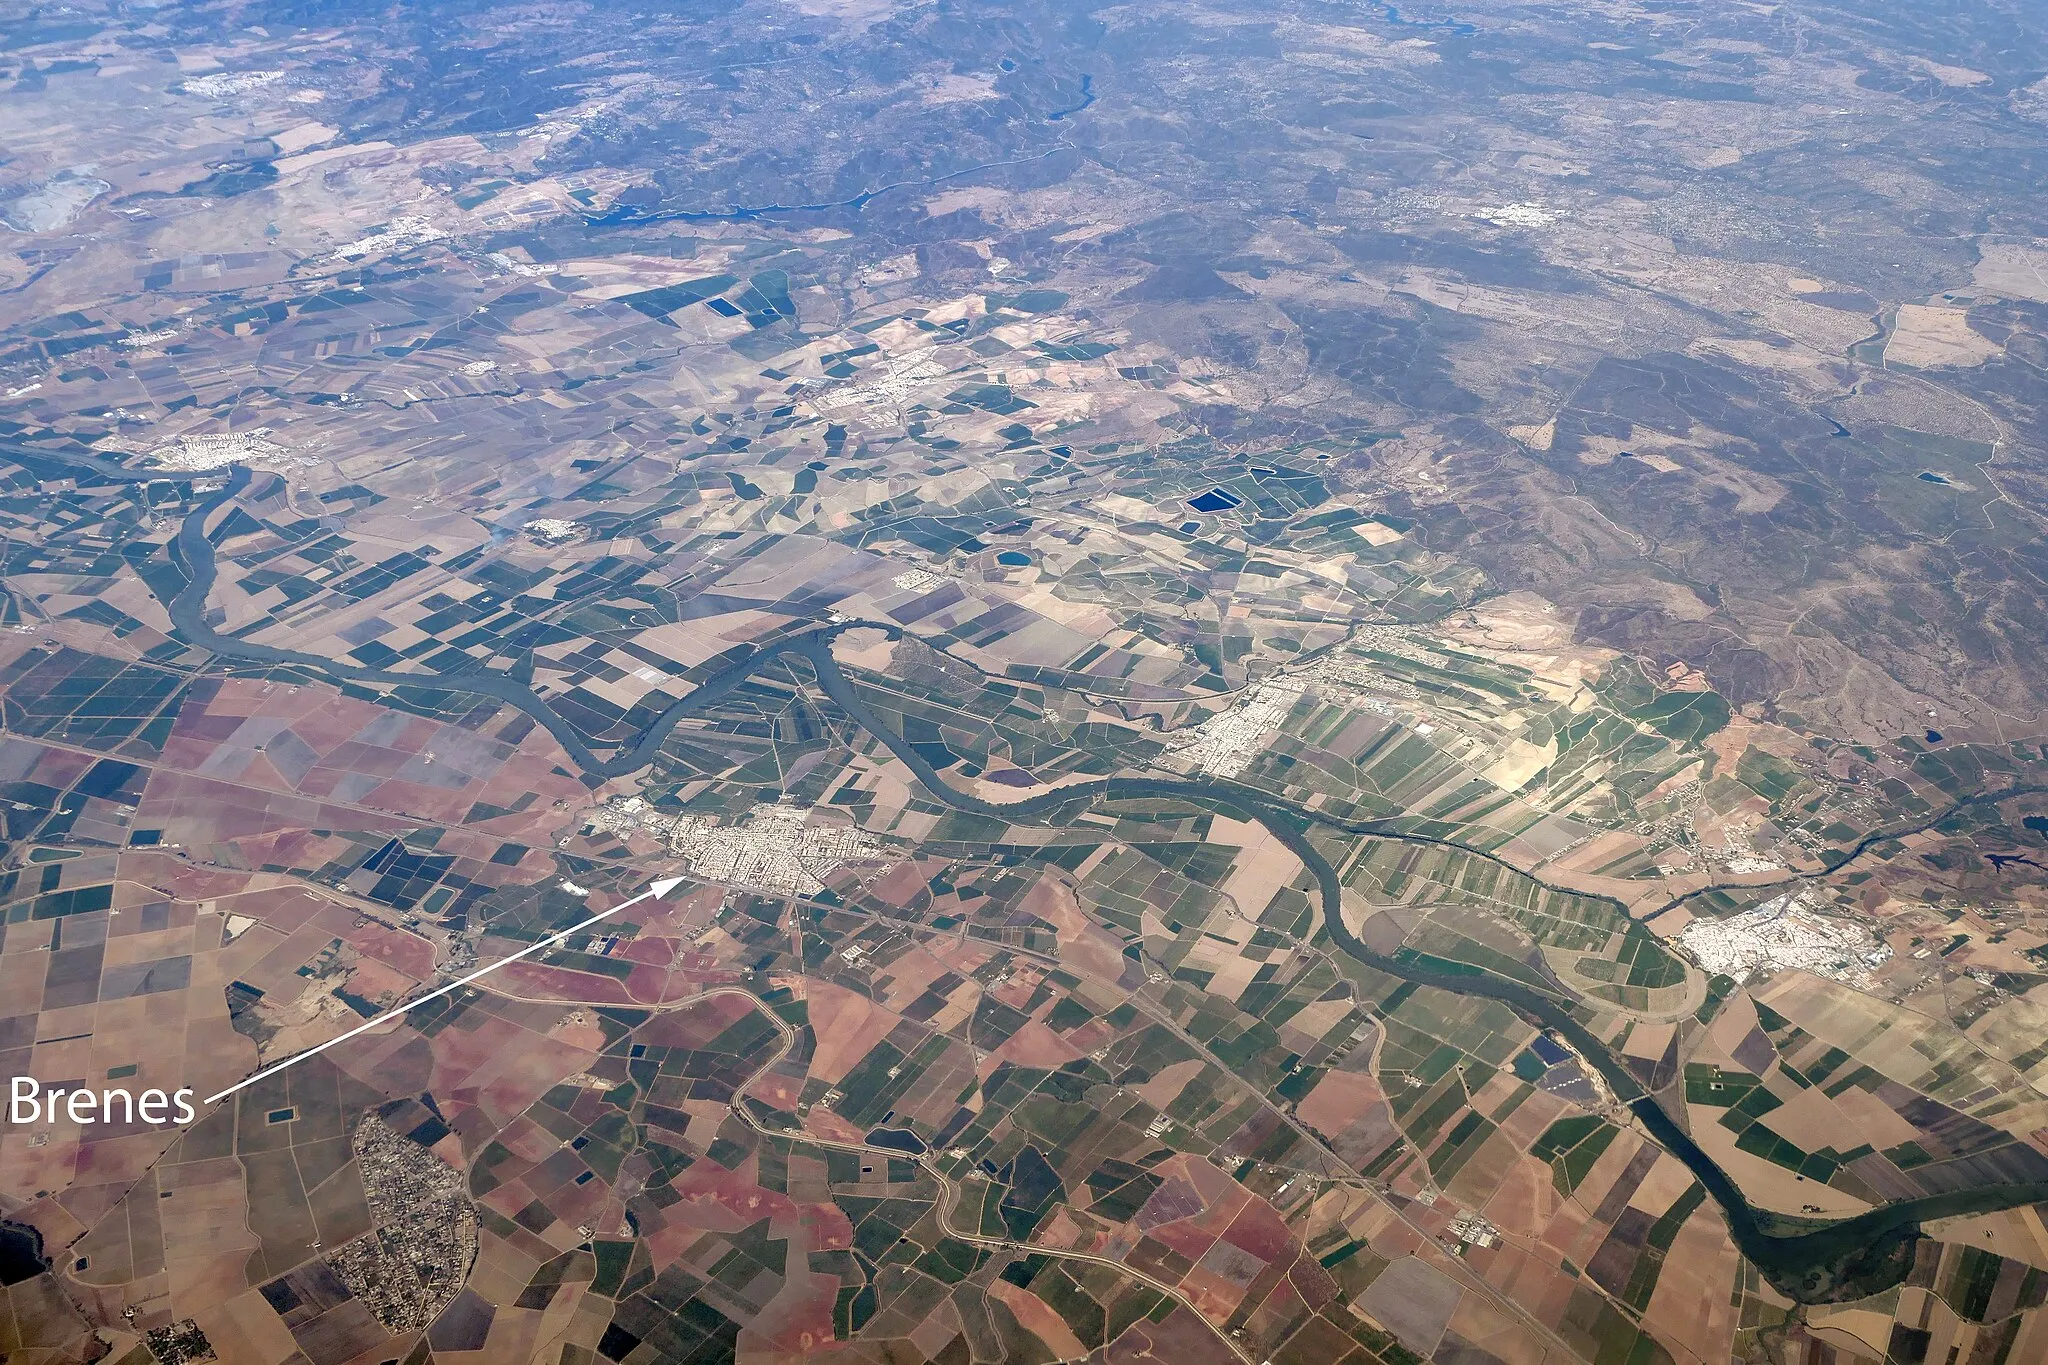 Photo showing: An aerial view of Brenes in Andalusia, Spain, and the countryside around it.